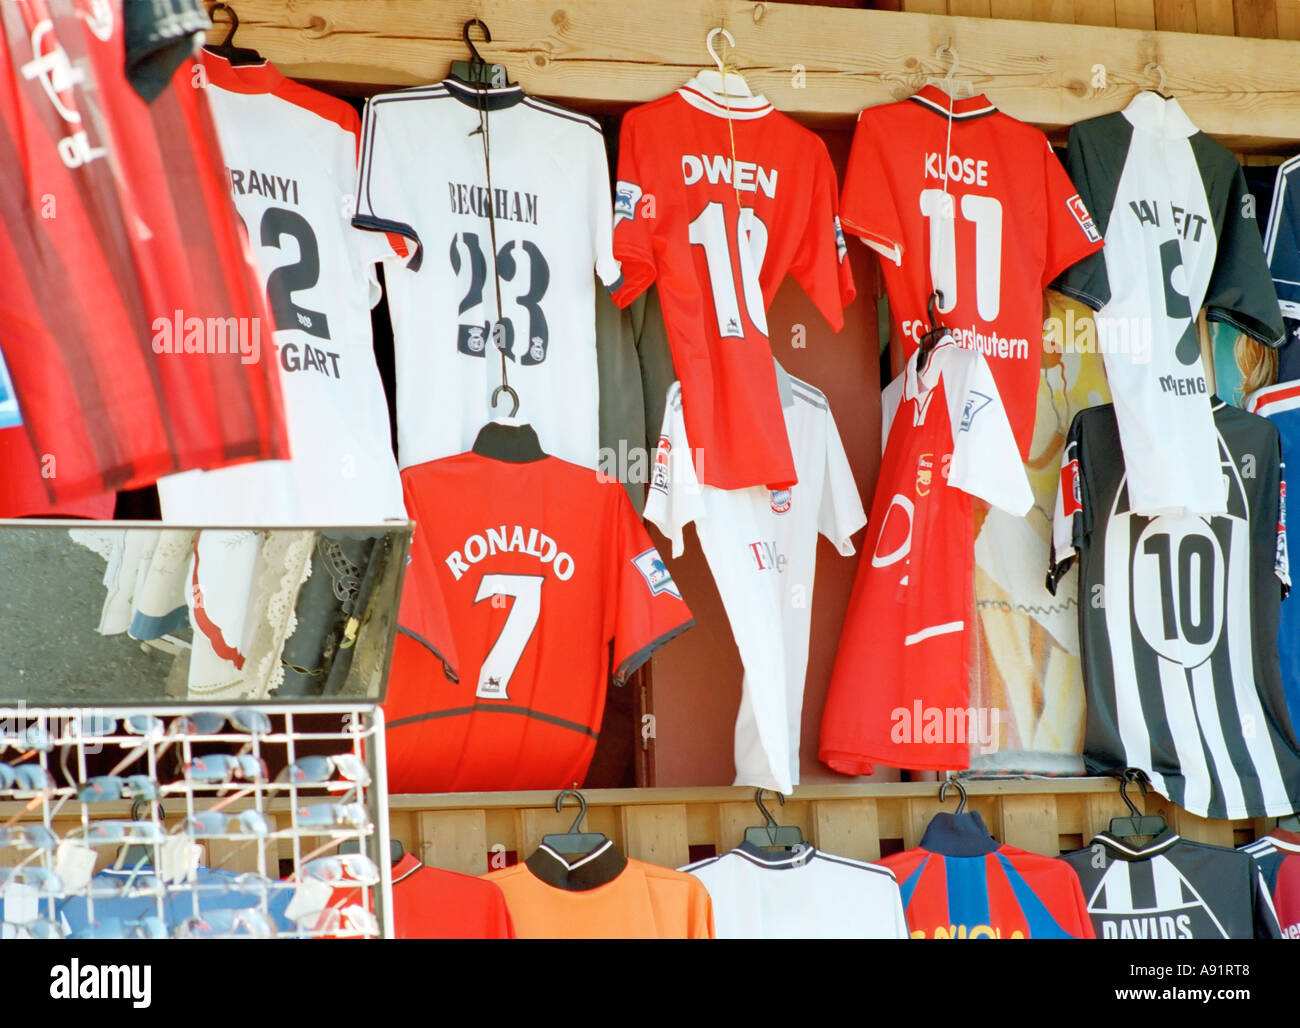 replica football shirts on sale in a 